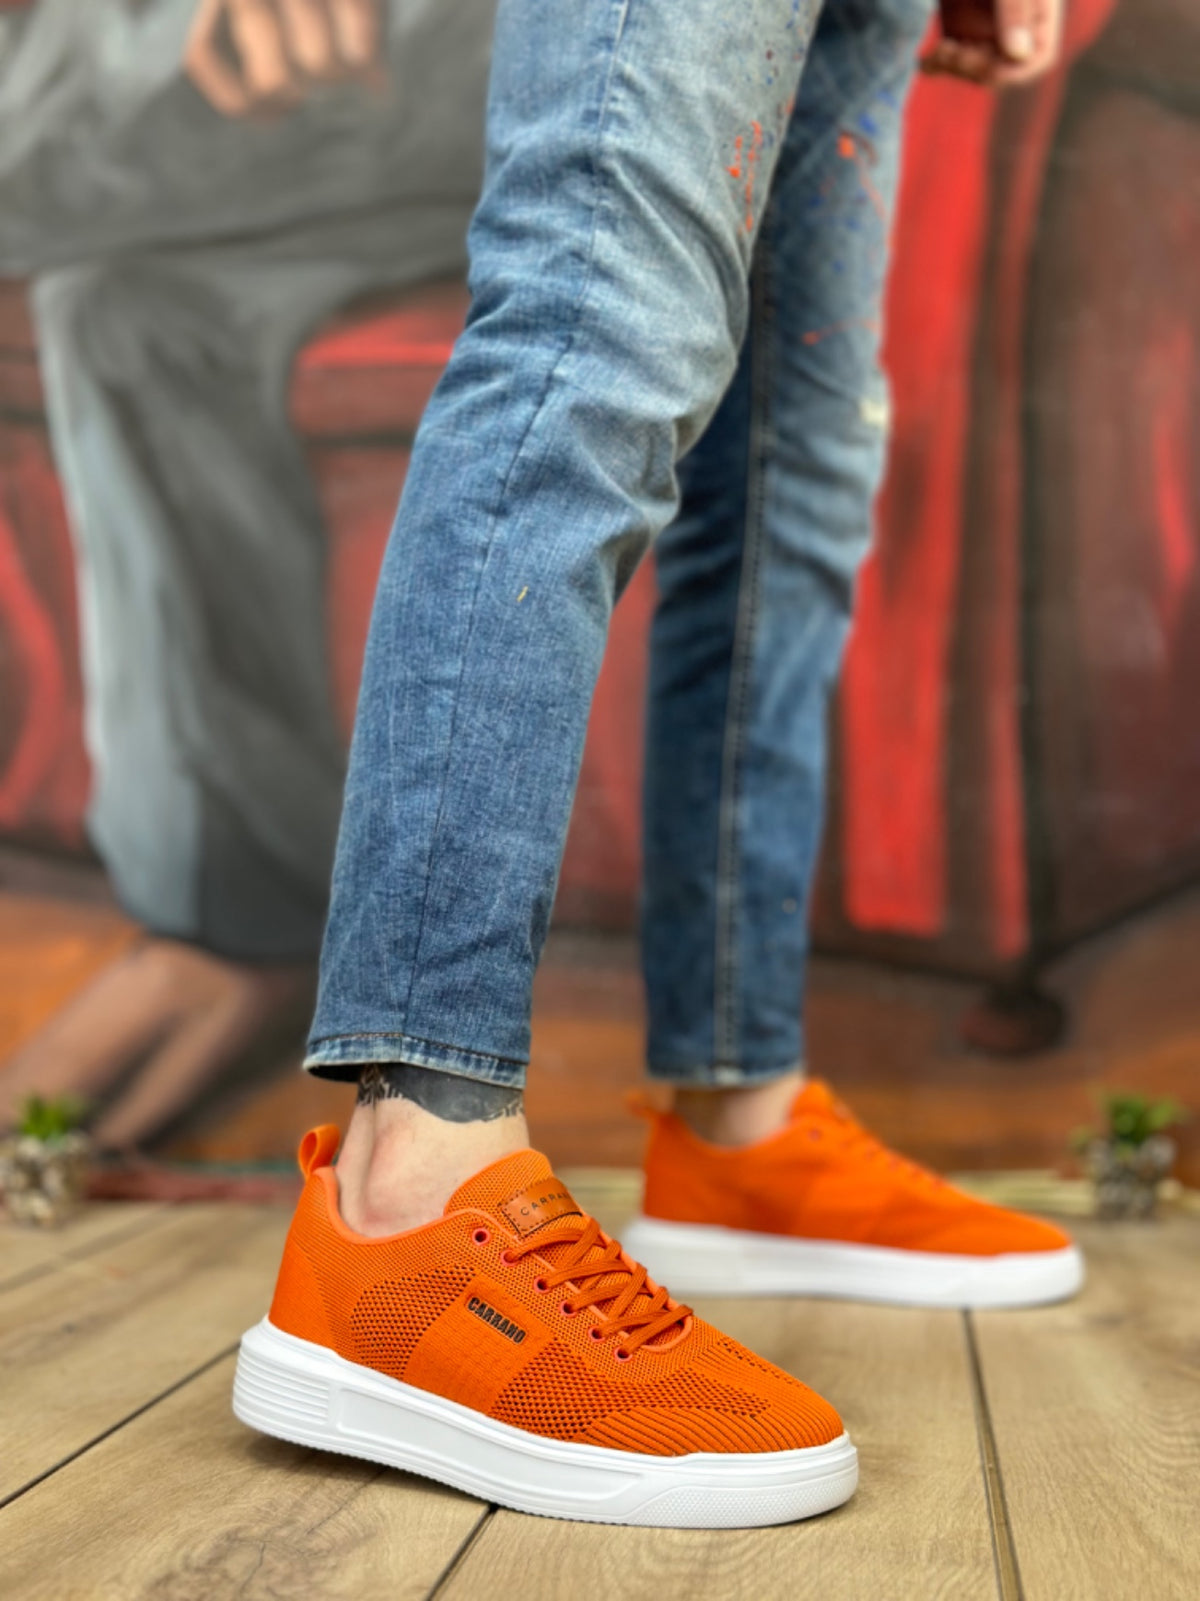 BA0349 Special Knitted Knitwear High Sole Style Orange Color Sports Shoes - STREETMODE™